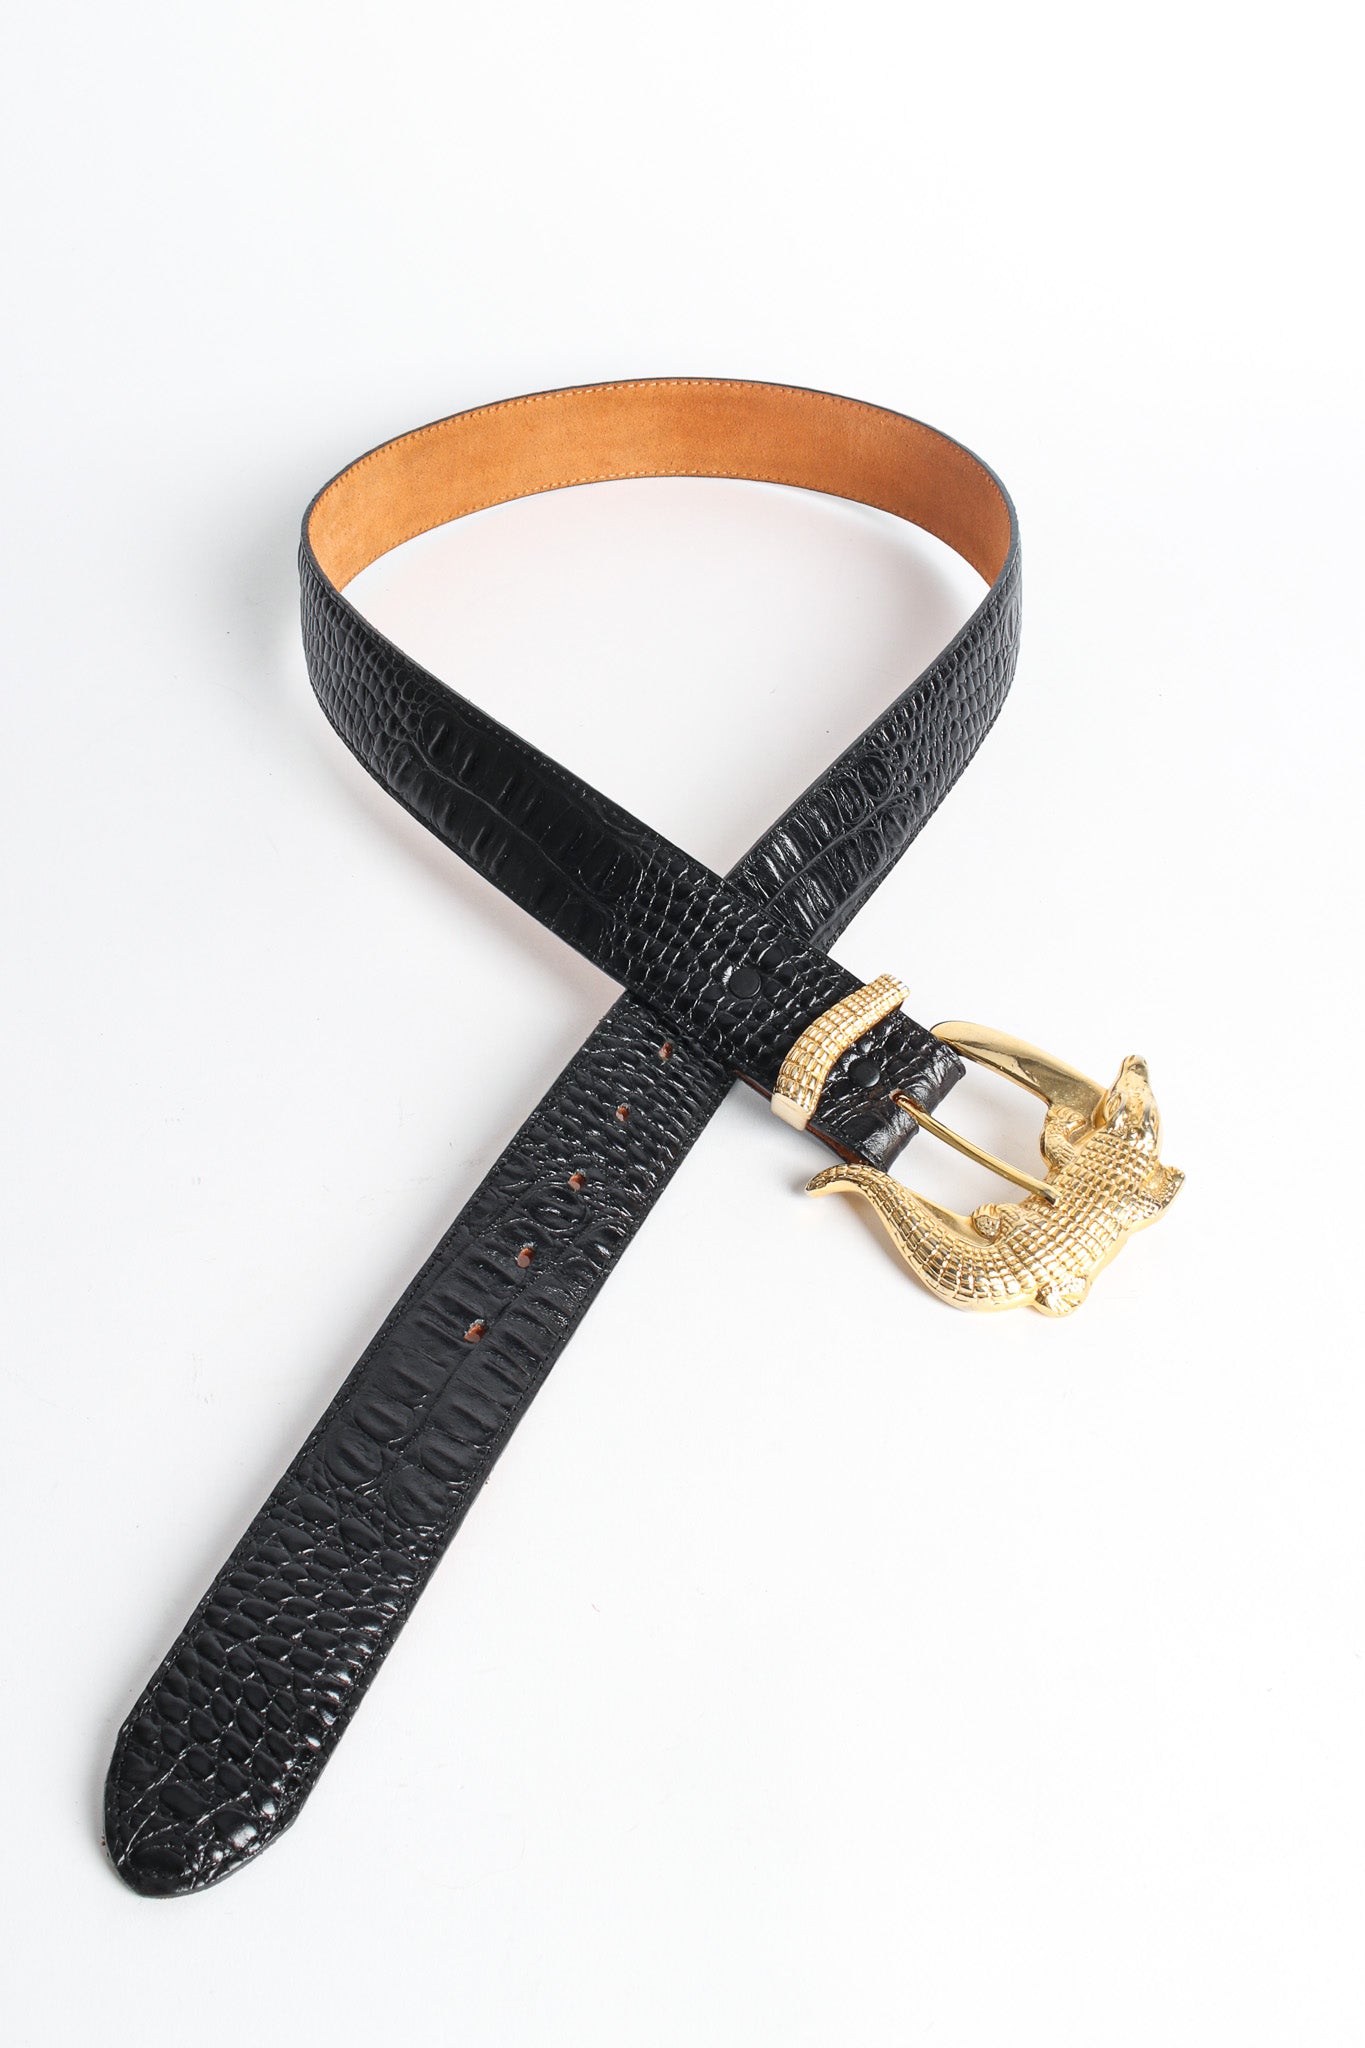 Black reptile leather belt with large alligator buckle by Justin loop flat lay @recessla